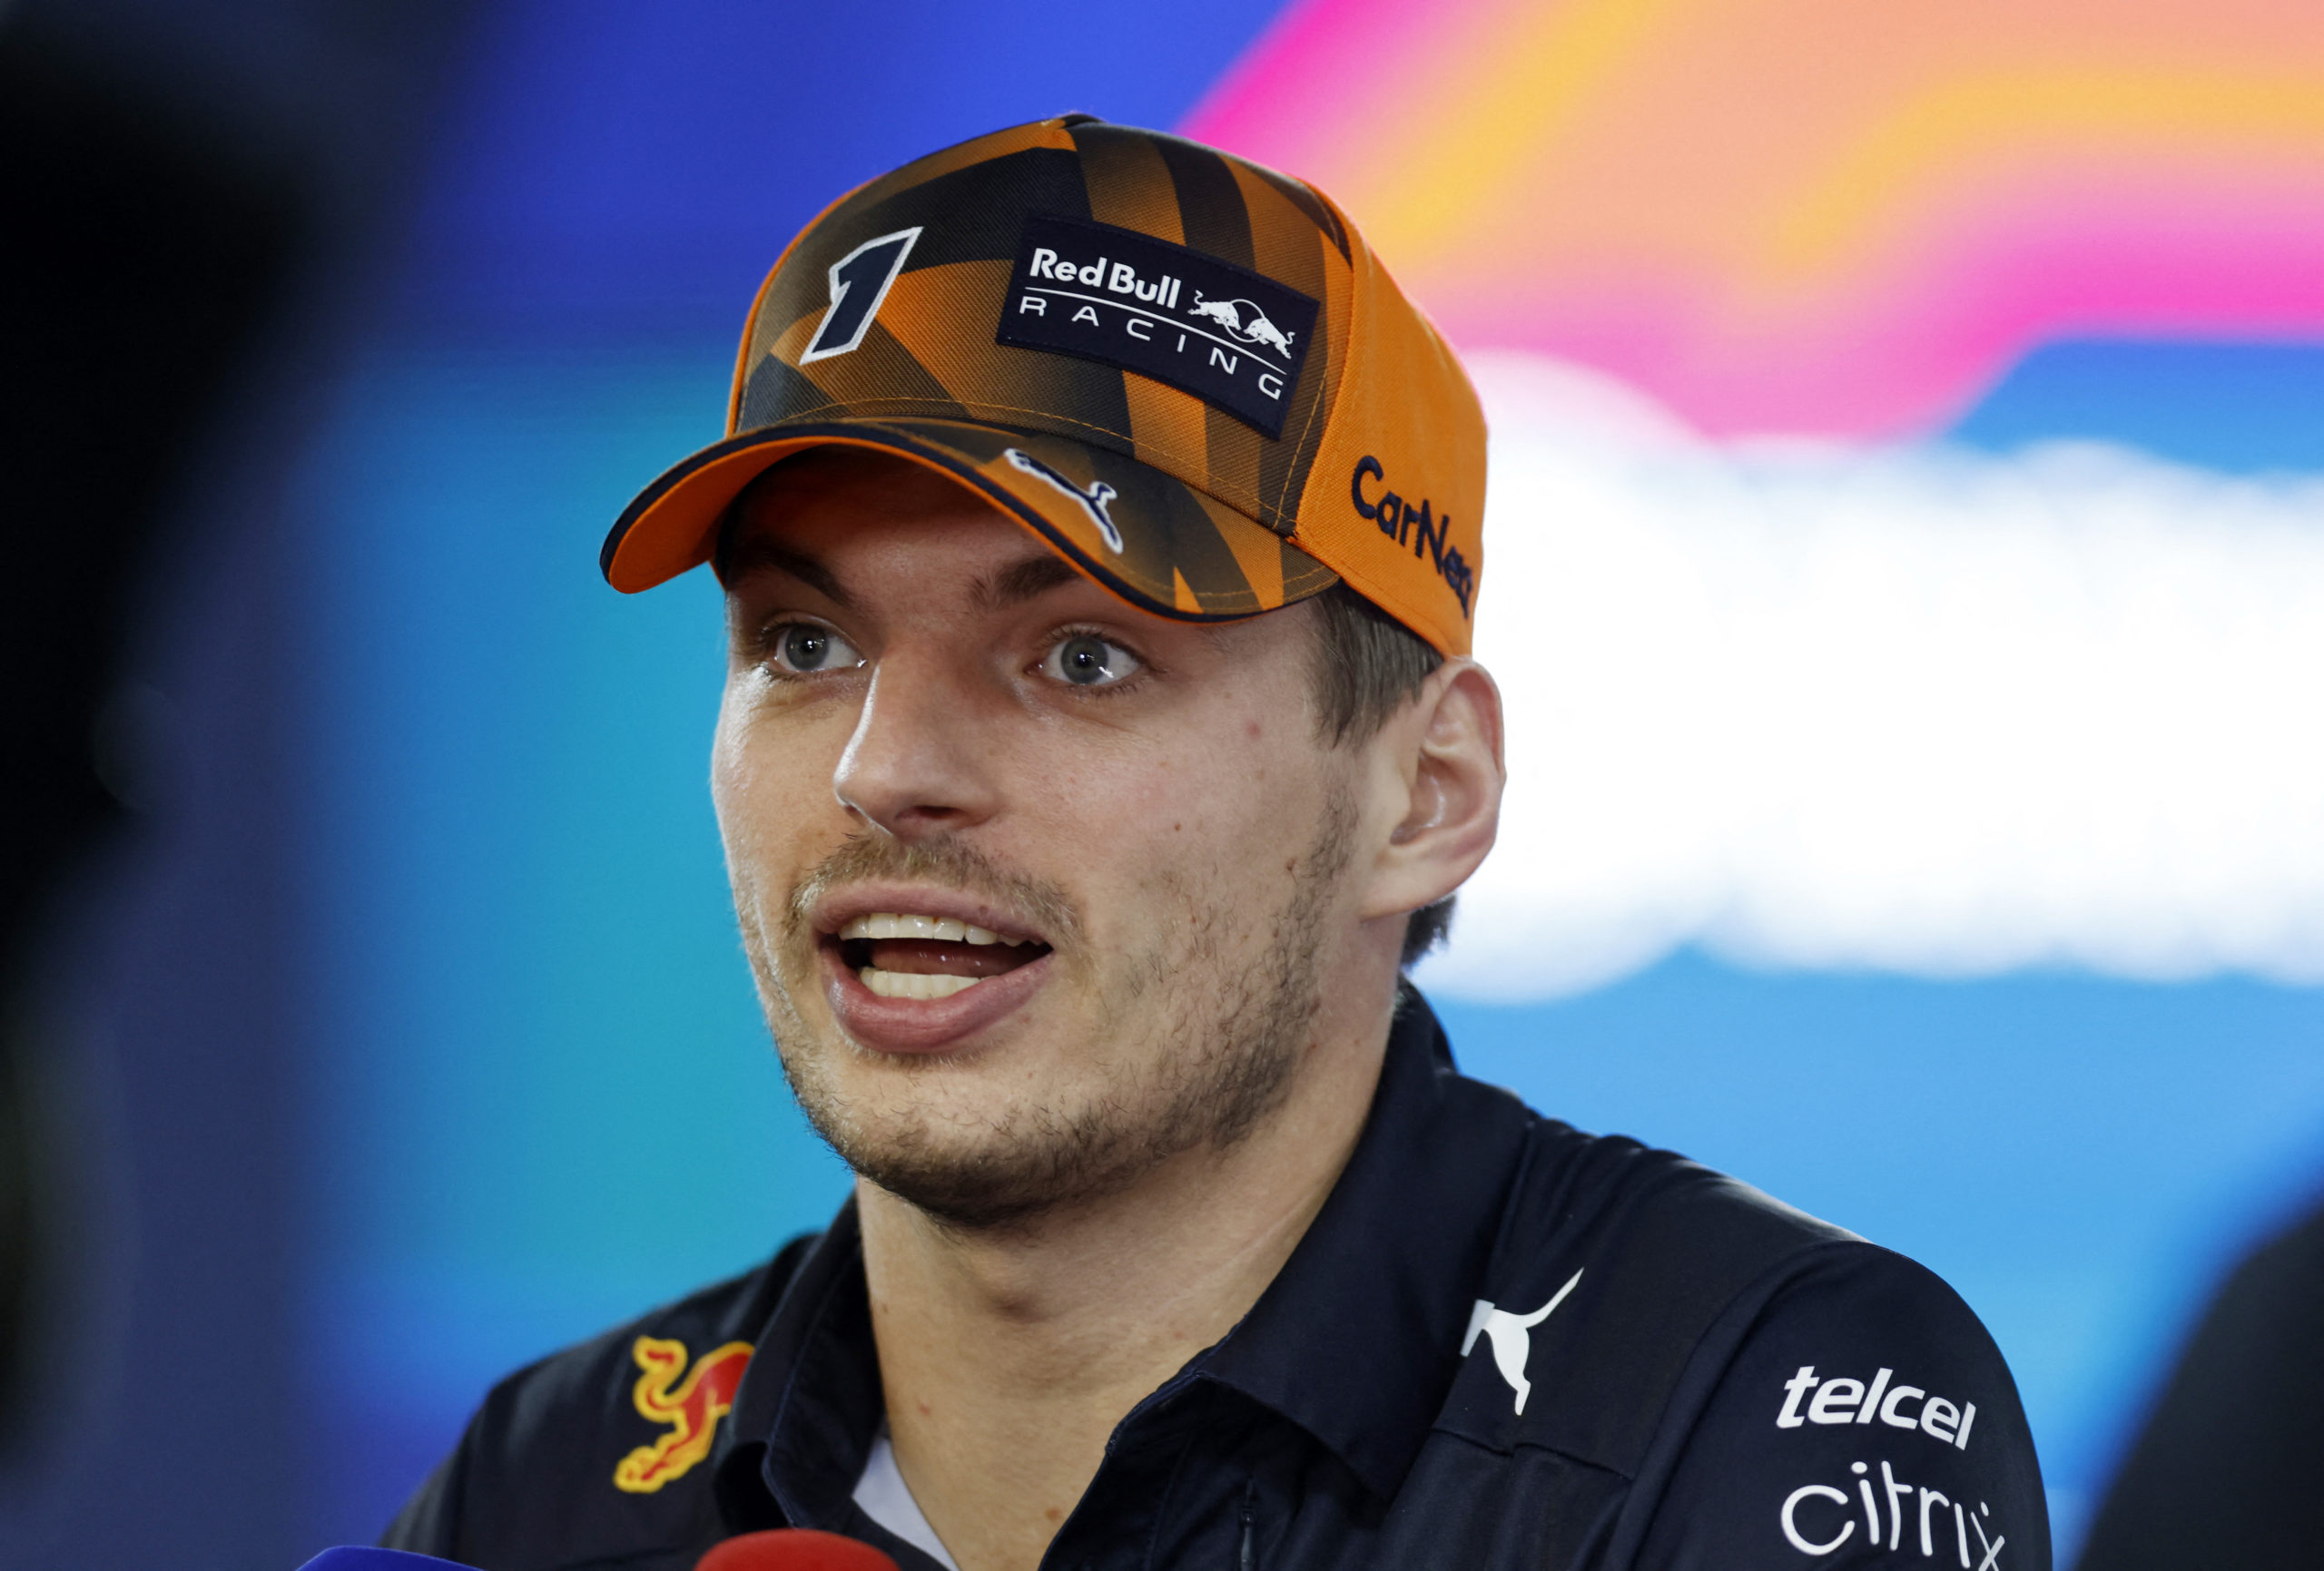 Formula One F1 - Singapore Grand Prix - Marina Bay Street Circuit, Singapore - September 29, 2022 Red Bull's Max Verstappen during a press conference ahead of the Singapore Grand Prix 